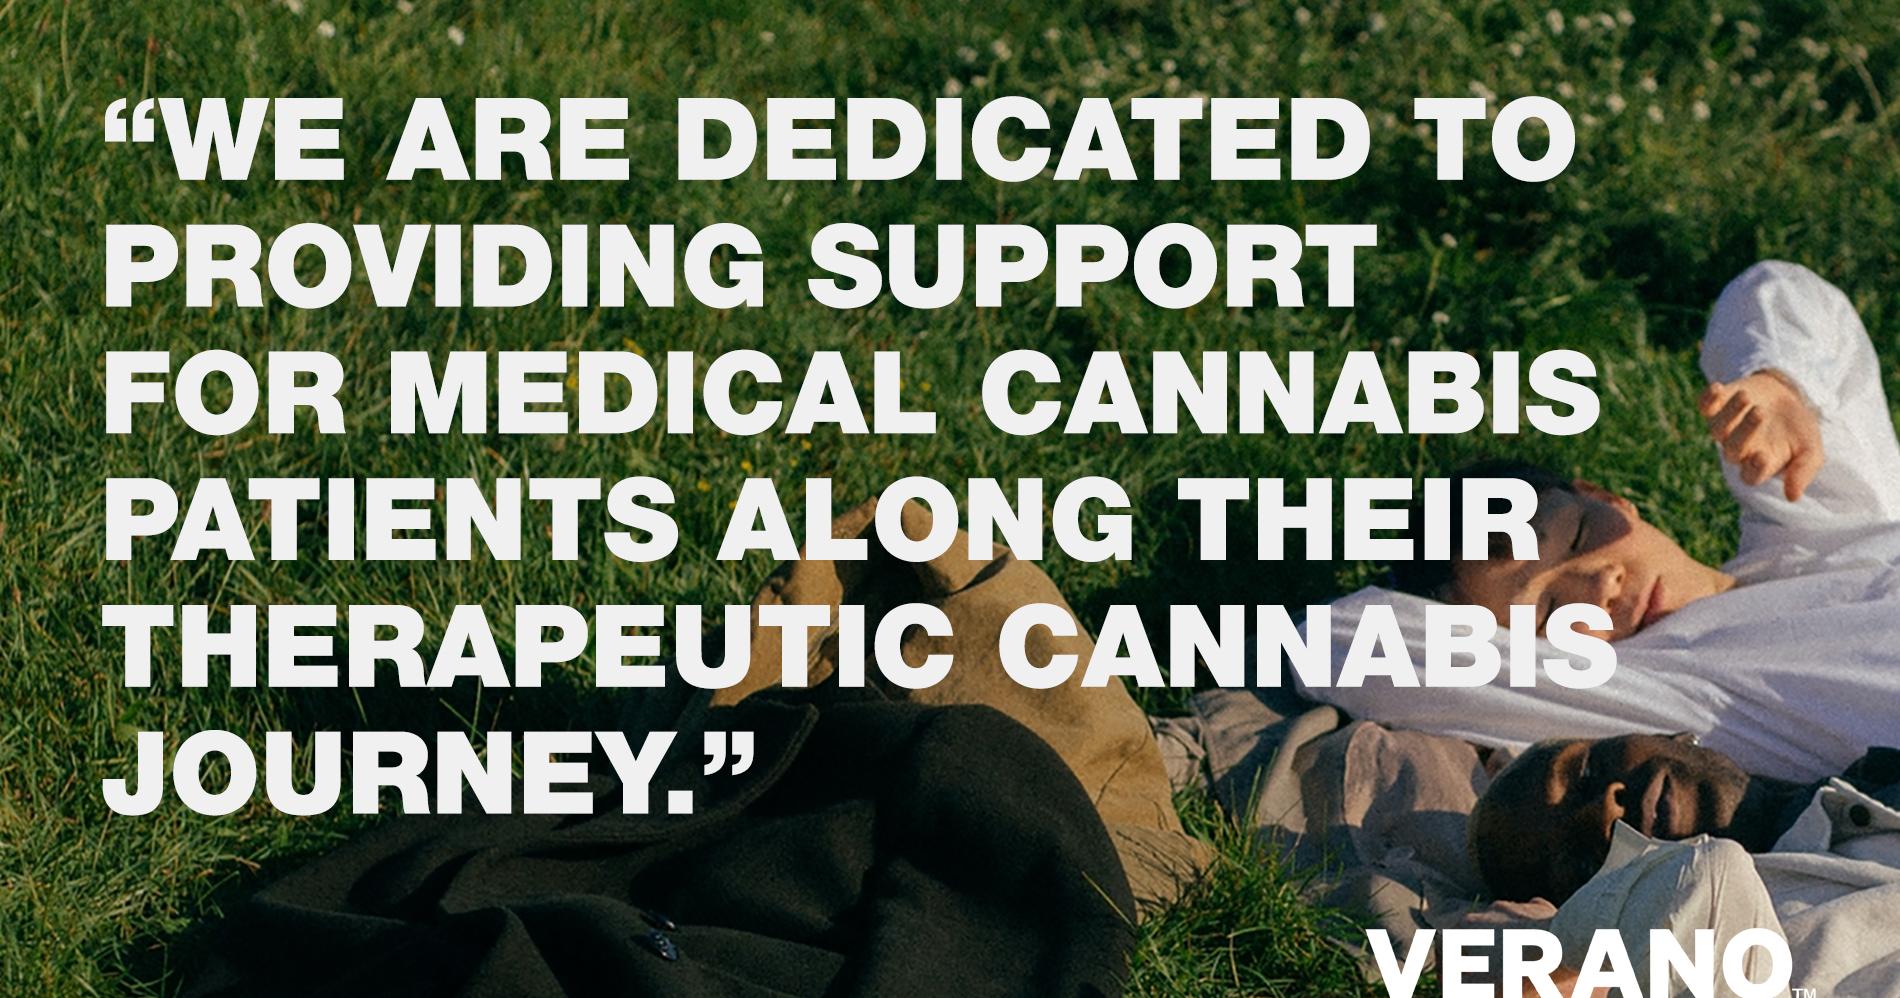 “We are dedicated to providing support for medical cannabis patients along their therapeutic cannabis journey.”